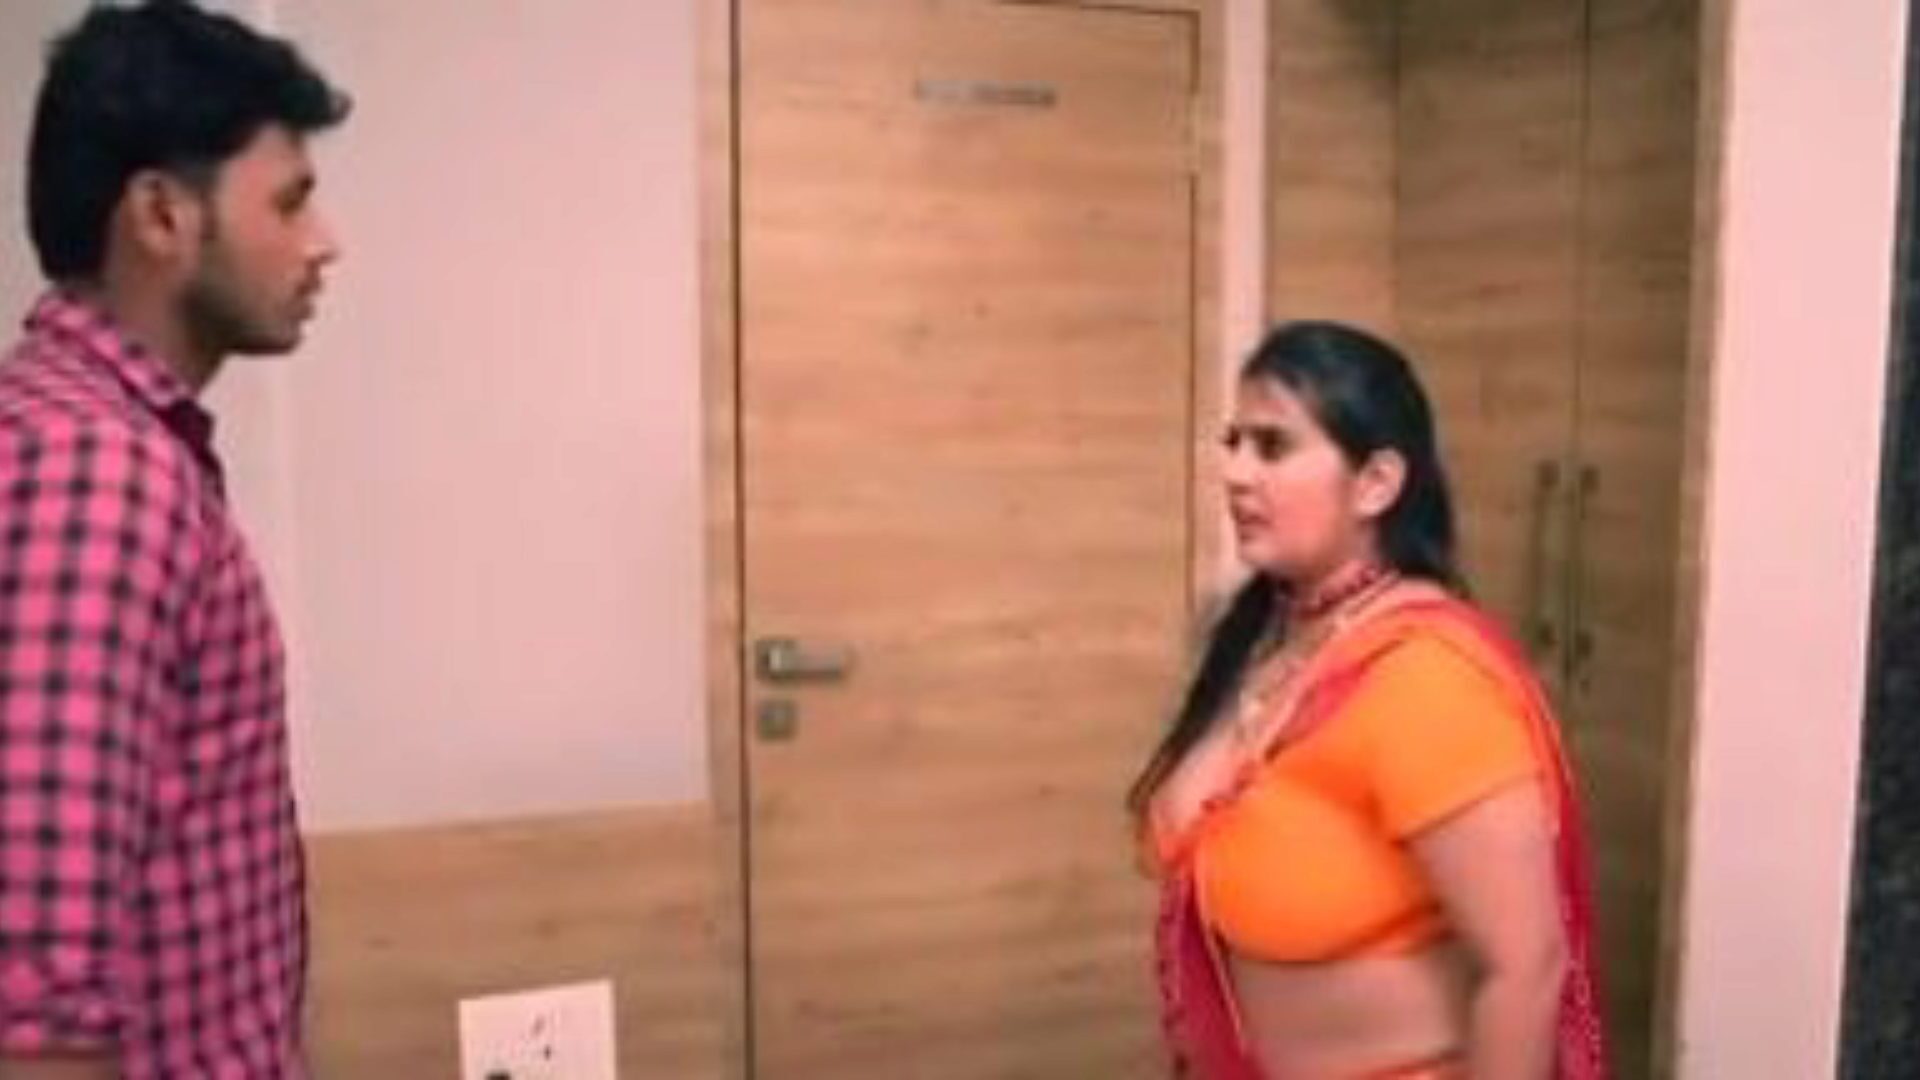 Kanchan Aunty Ep5: Free Aunty Xxx Porn Video 03 - xHamster Watch Kanchan Aunty Ep5 tube lovemaking movie scene for free-for-all on xHamster, with the superior bevy of Bangladeshi Aunty Xxx & Aunty Mobile porno movie vignettes